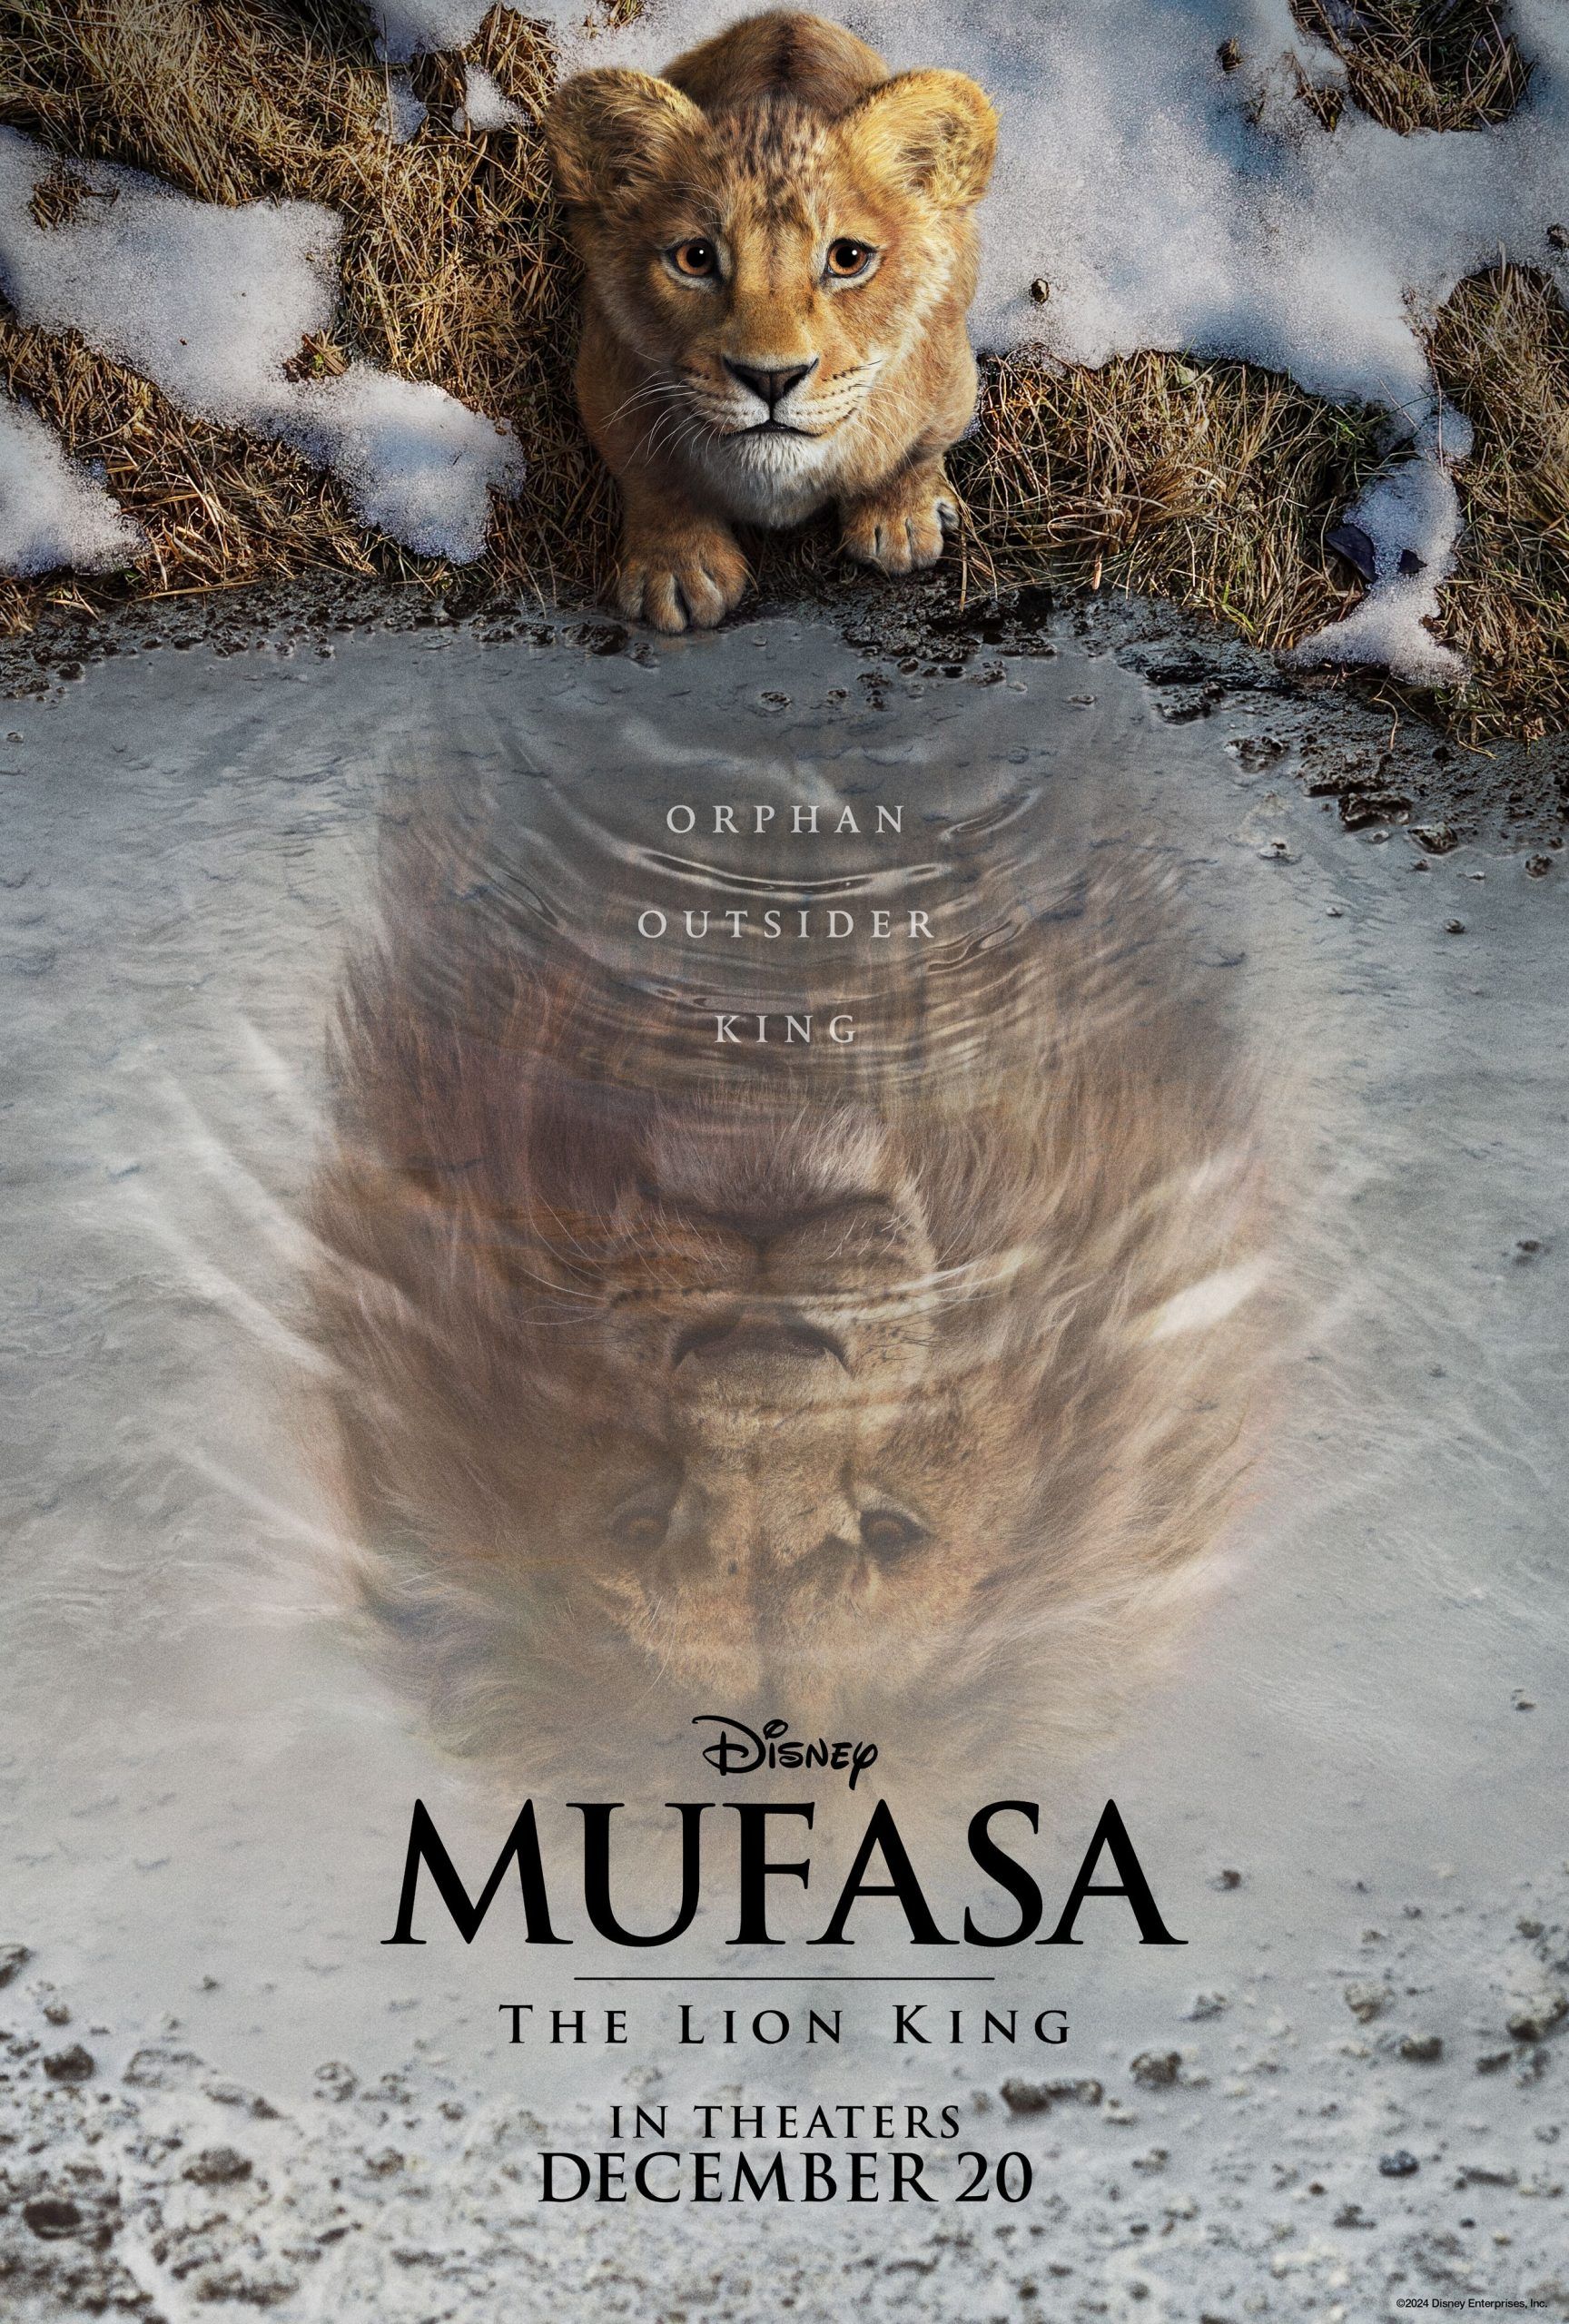 Mufasa The Lion King Showing A Young Simba Looking into a Reflection of an Adult Simba